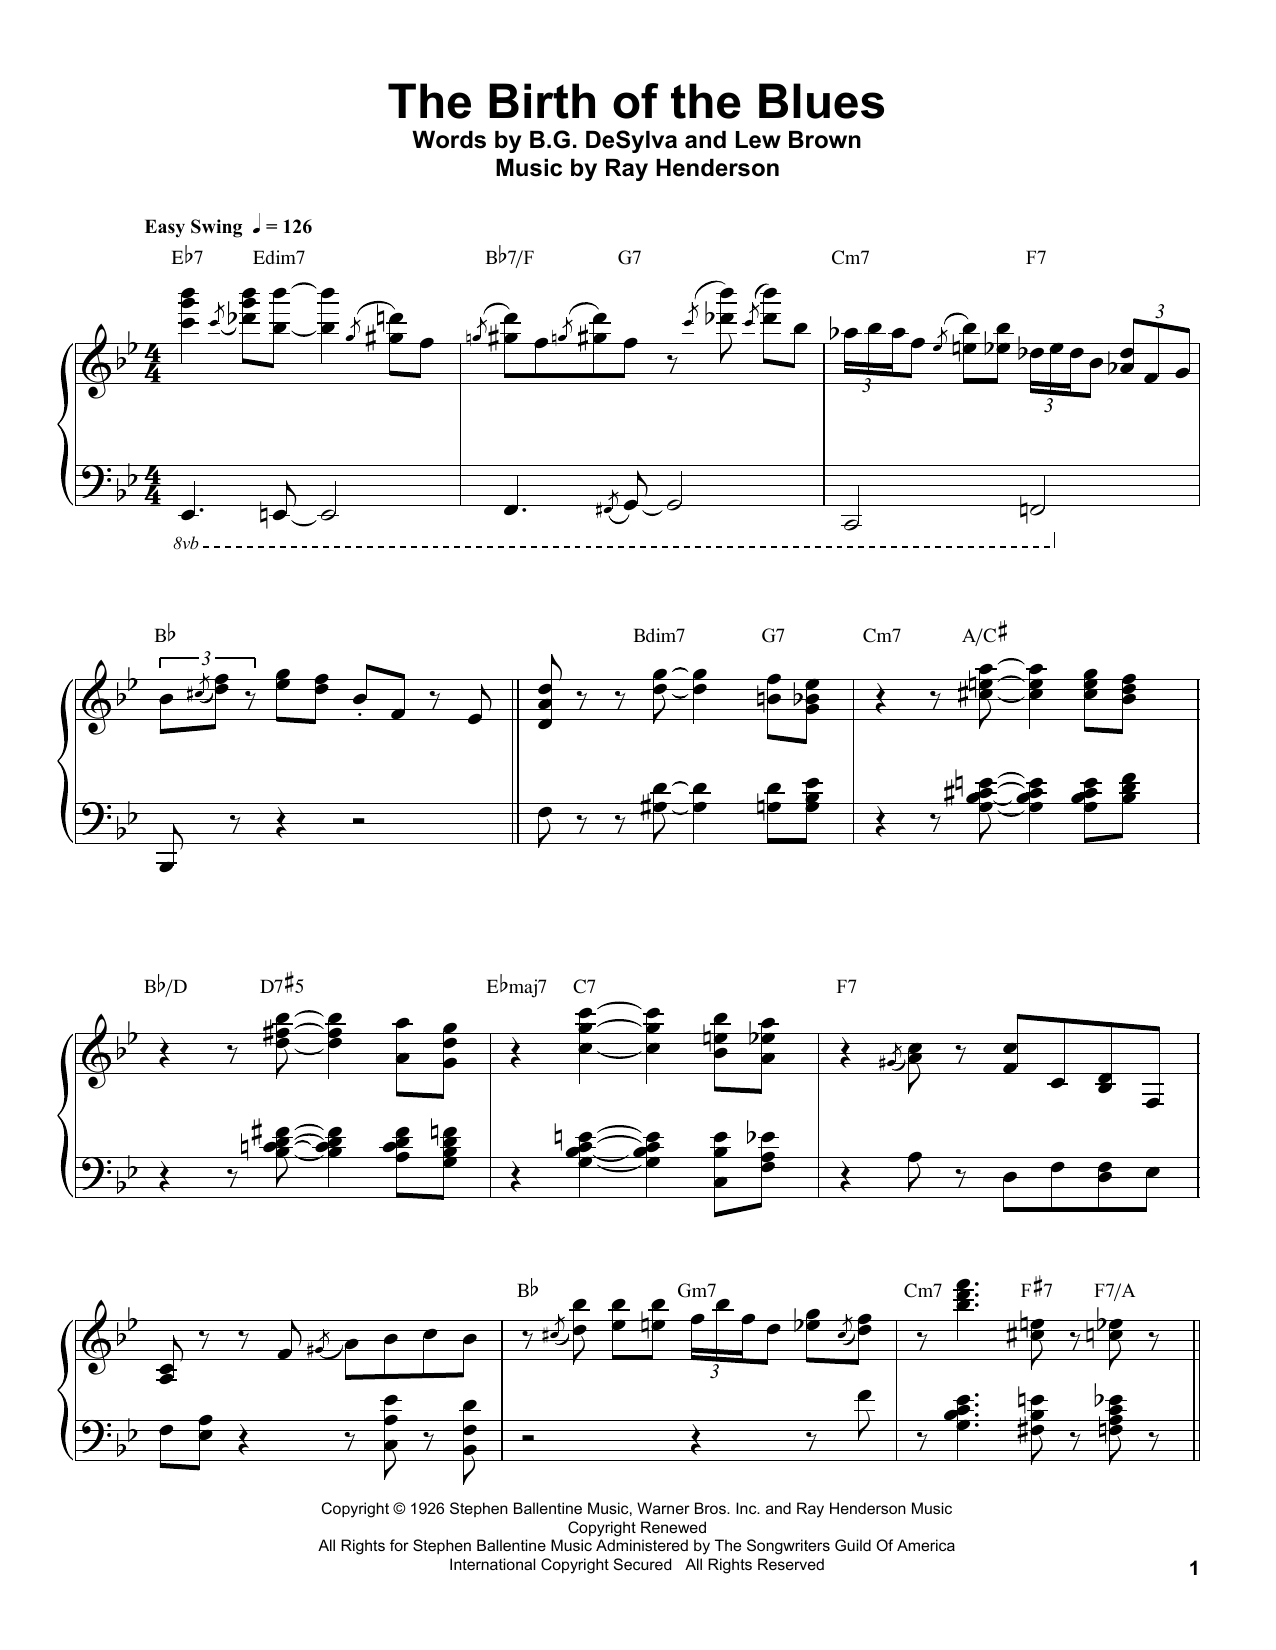 Oscar Peterson The Birth Of The Blues sheet music notes and chords. Download Printable PDF.